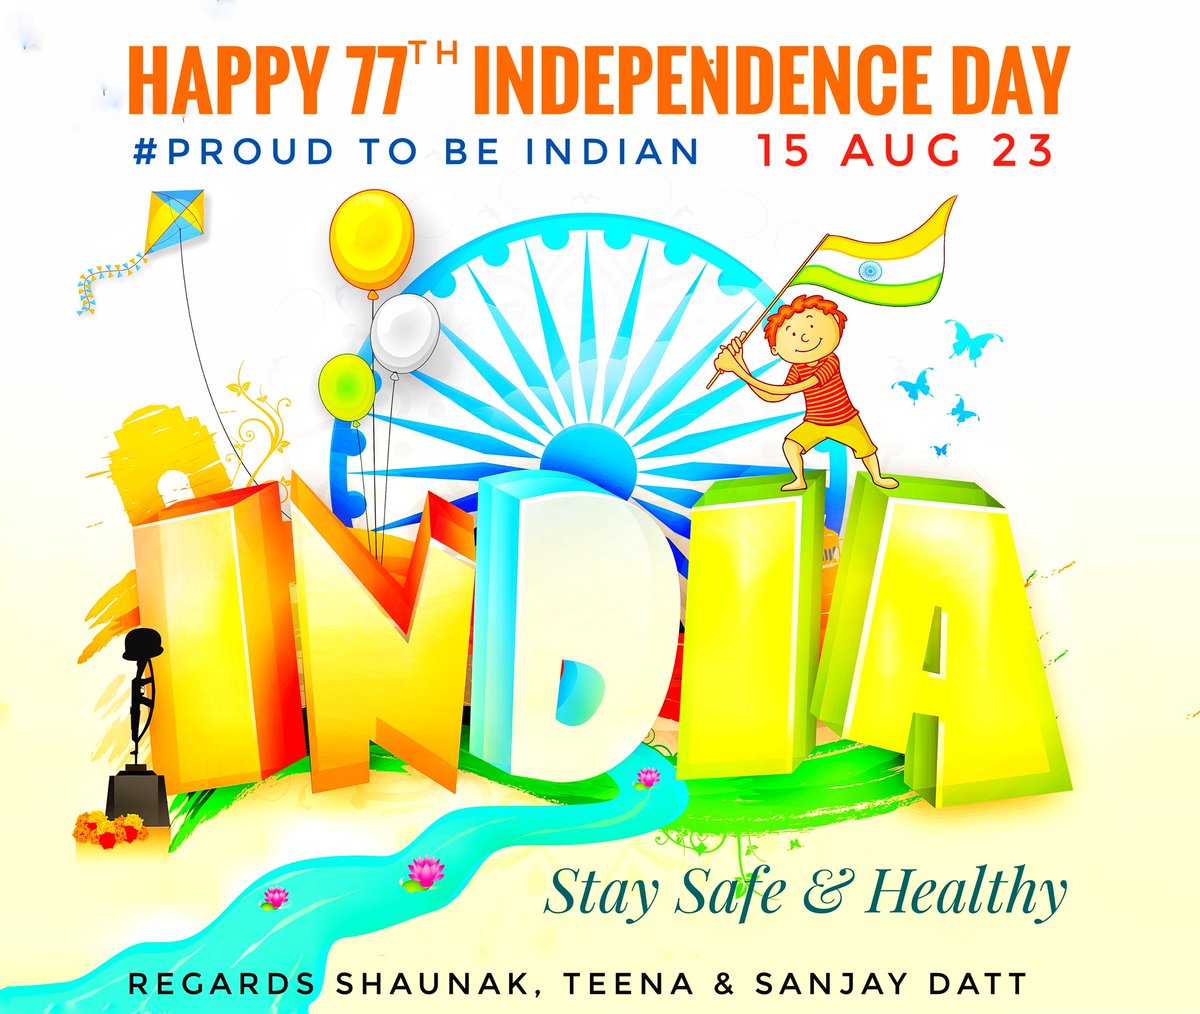 Happy 77th Independence Day. May we work together to make India great..
#ProudToBeIndian
#CDM_IDS 
@10201NEC